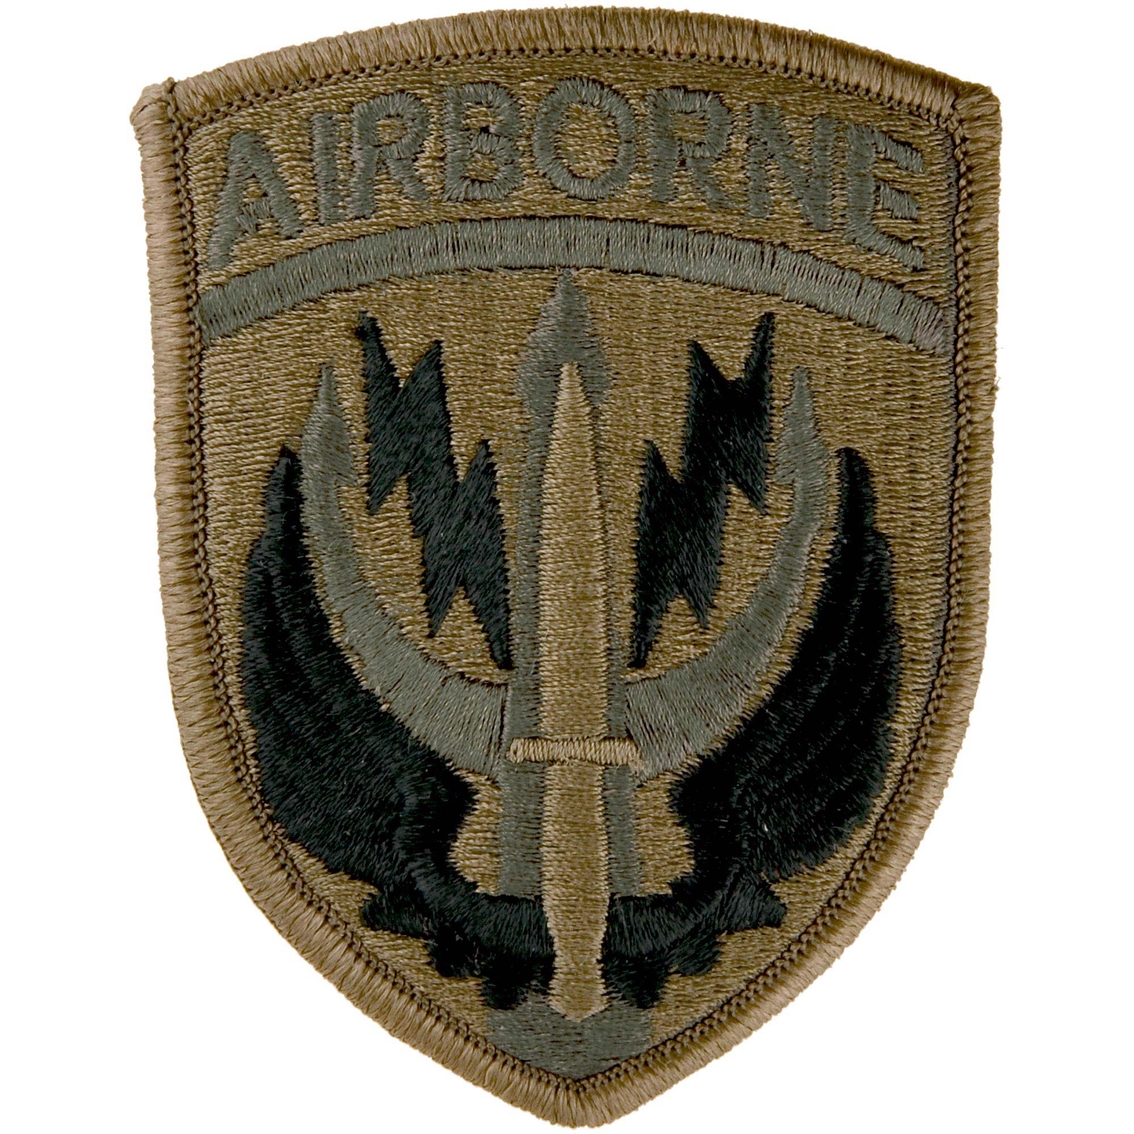 ARMY SPECIAL OPERATIONS COMMAND CENTRAL FULL COLOR PATCH NEW:K5 U.S 